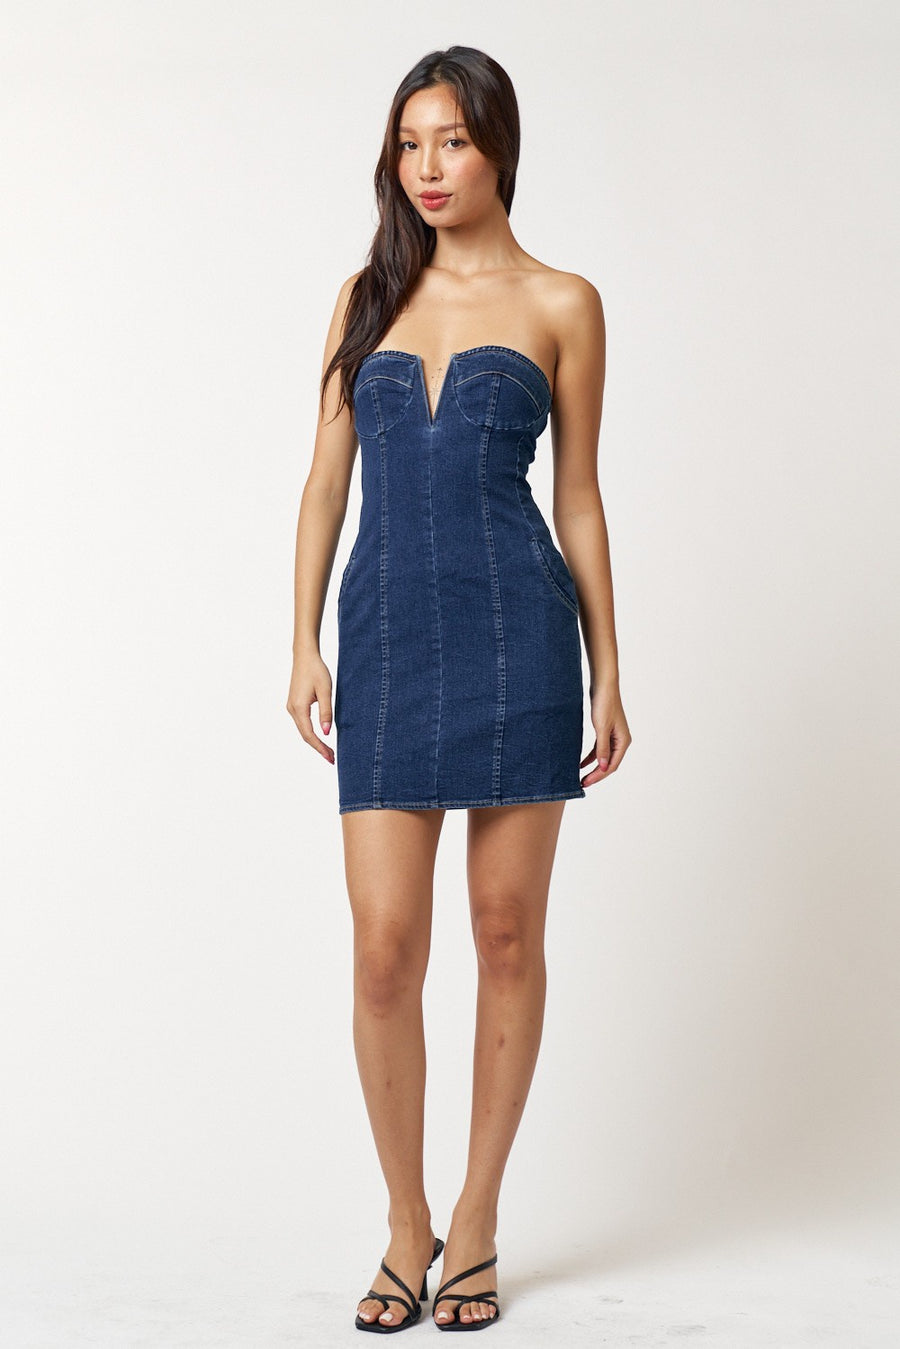 Featuring a strapless denim mini dress with a V-cut and pockets on each side In the shade dark denim 